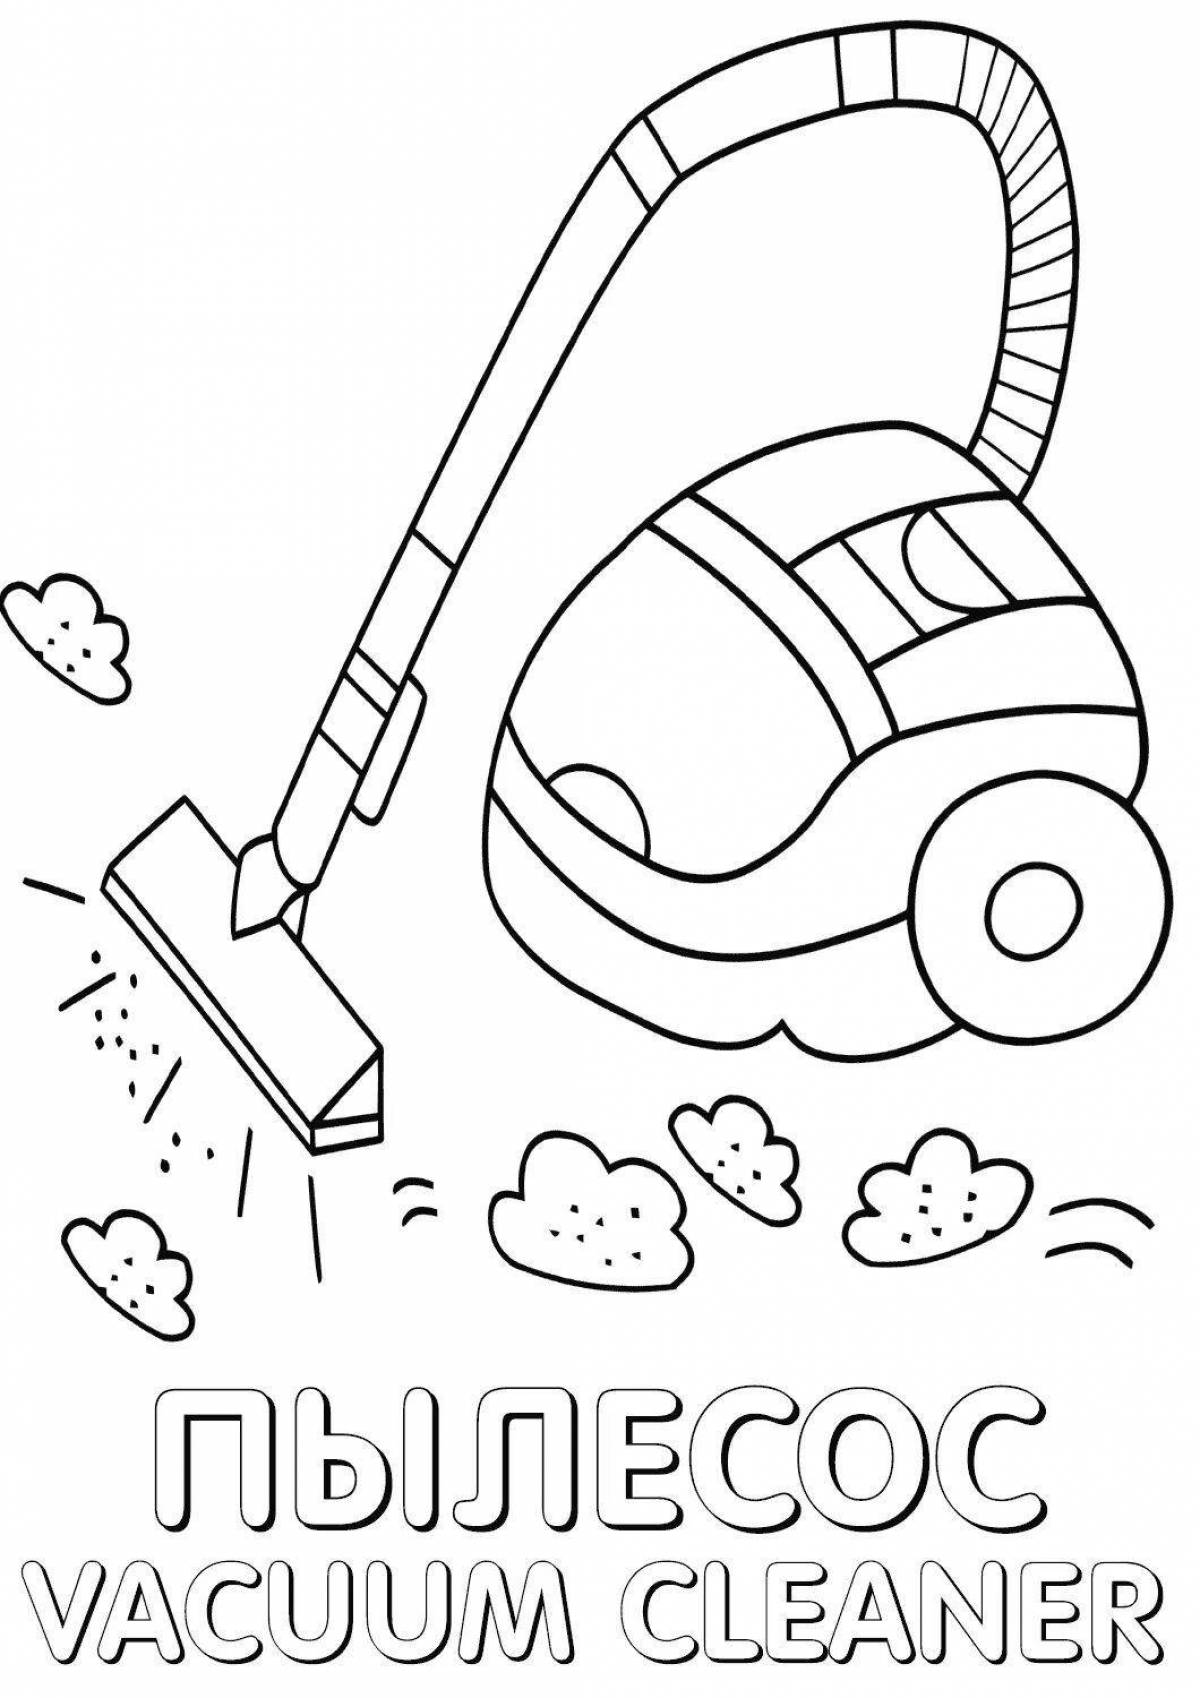 Playful vacuum cleaner coloring page for 3-4 year olds